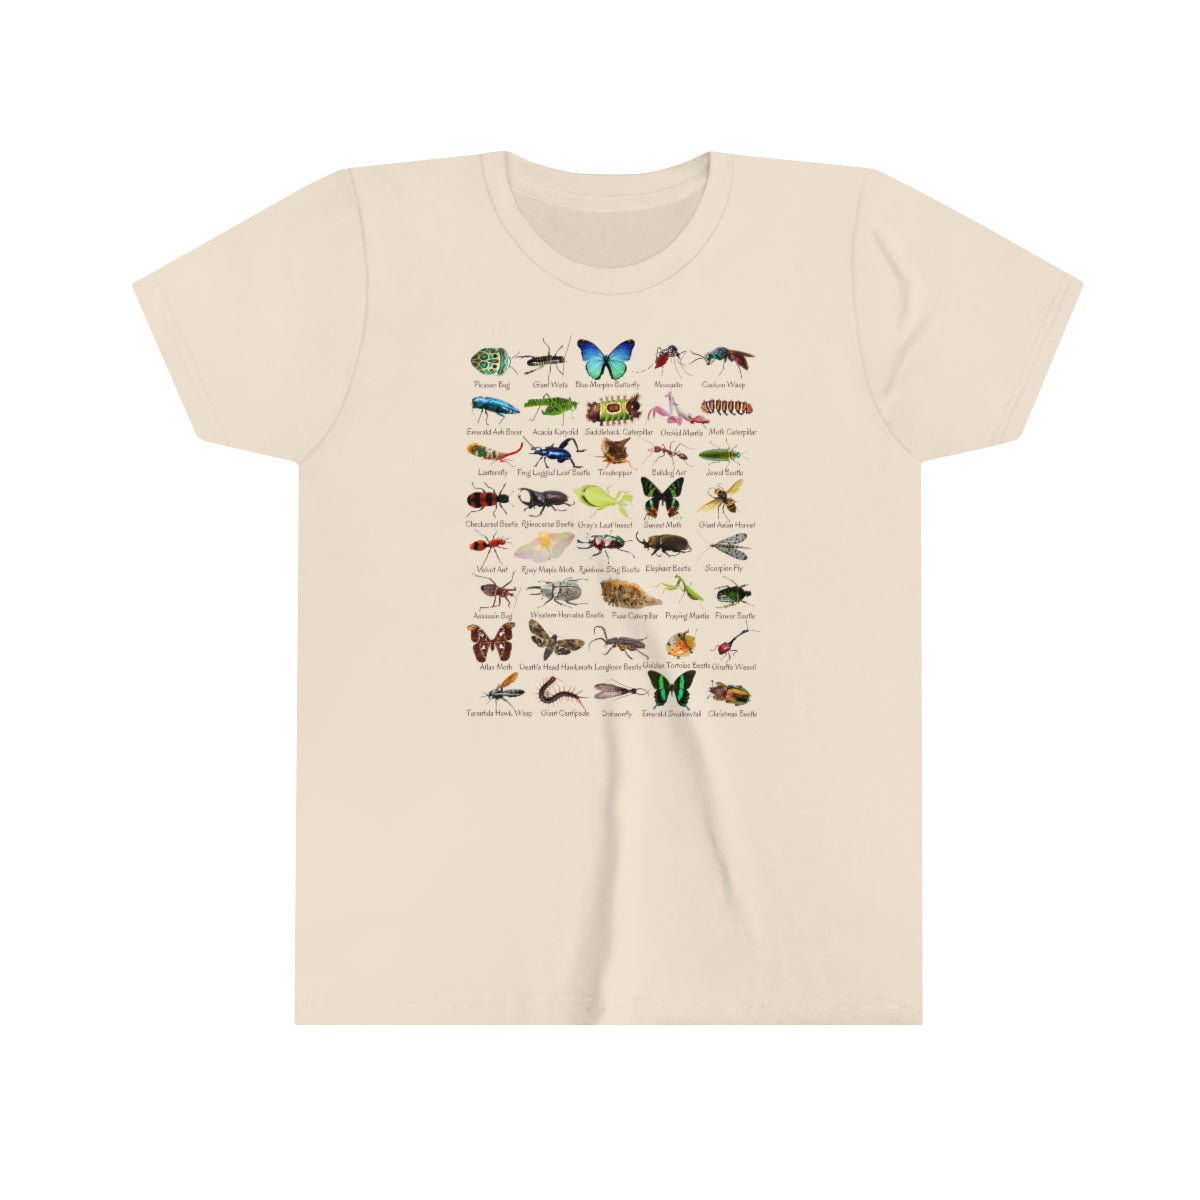 Impressive Insects Youth T-shirt